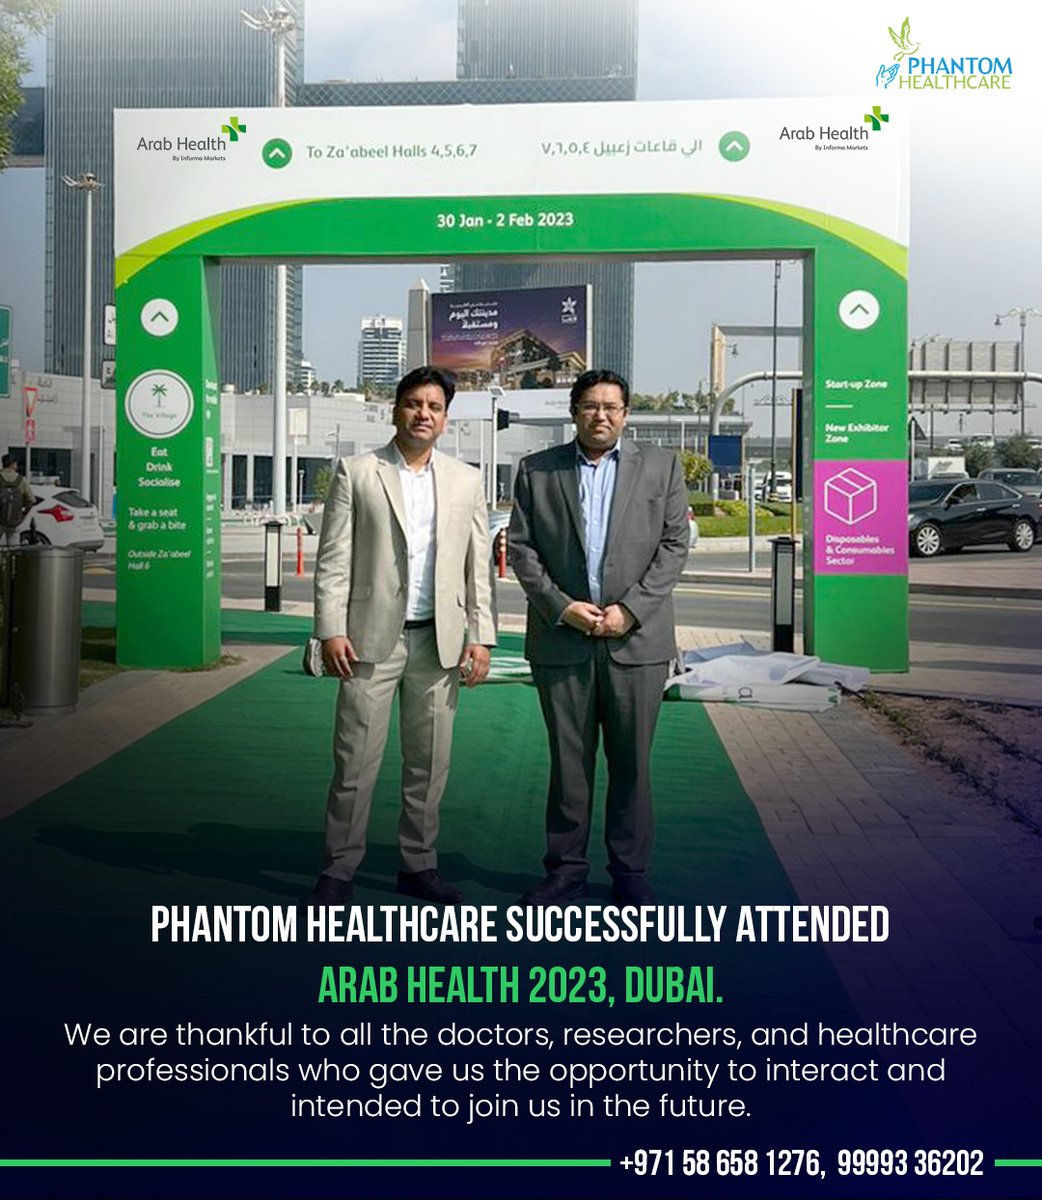 We are Strengthening our Global Presence.

PHANTOM HEALTHCARE SUCCESSFULLY ATTENDED ARAB HEALTH 2023, DUBAI. 

#ArabHealth #ArabHealth2023 #dubai #uae #dubaihealth #uaehealth #phantomhealthcare #phantom #exhibition #conference #medicalexhibition #medicalconference #medicalevent